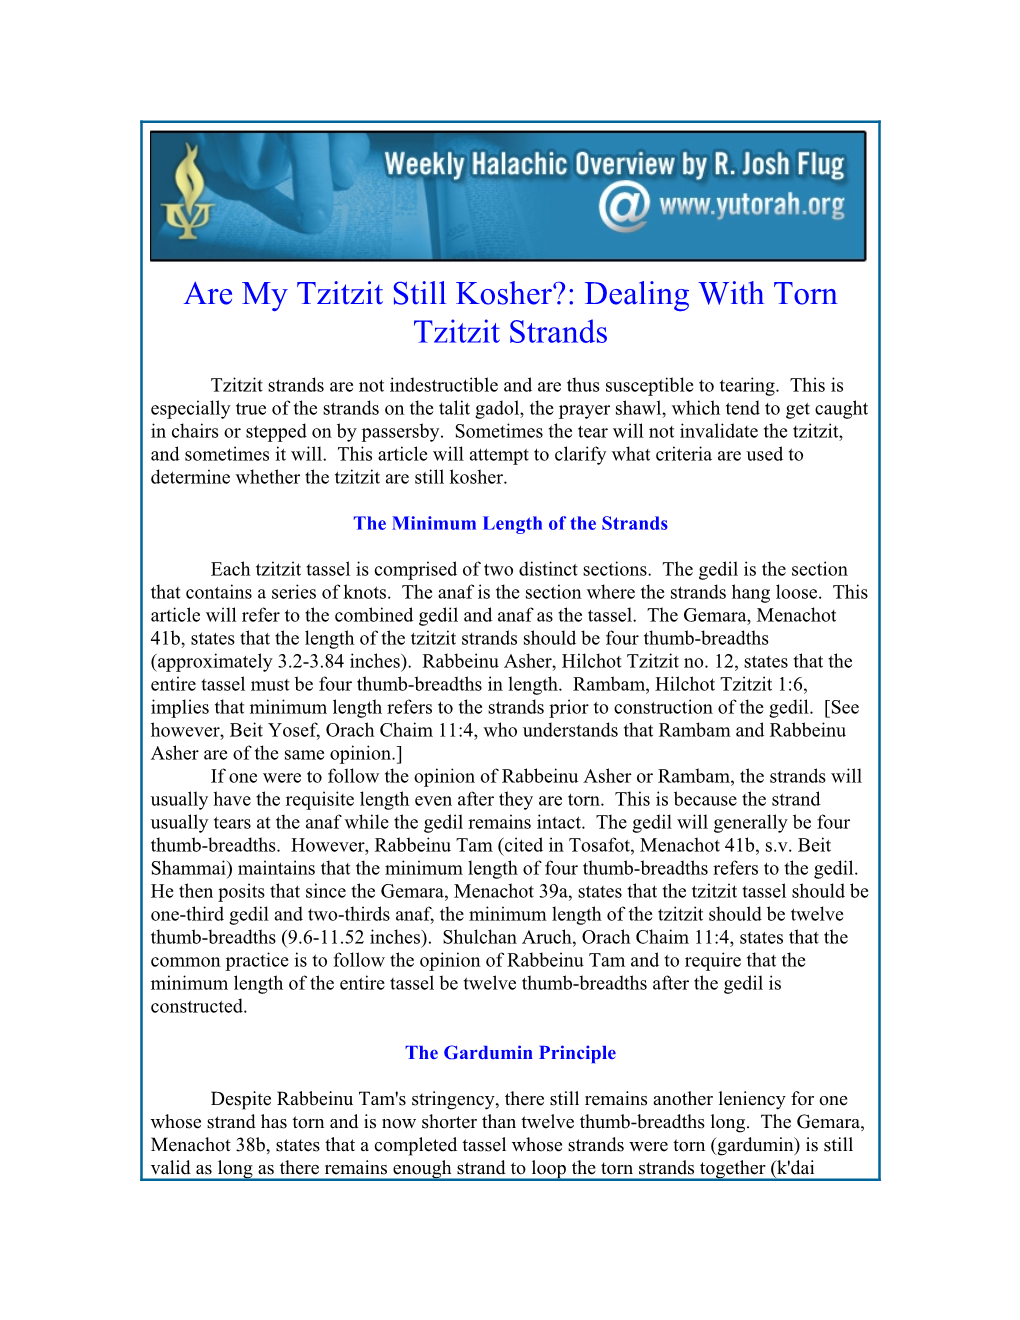 Are My Tzitzit Still Kosher?: Dealing with Torn Tzitzit Strands